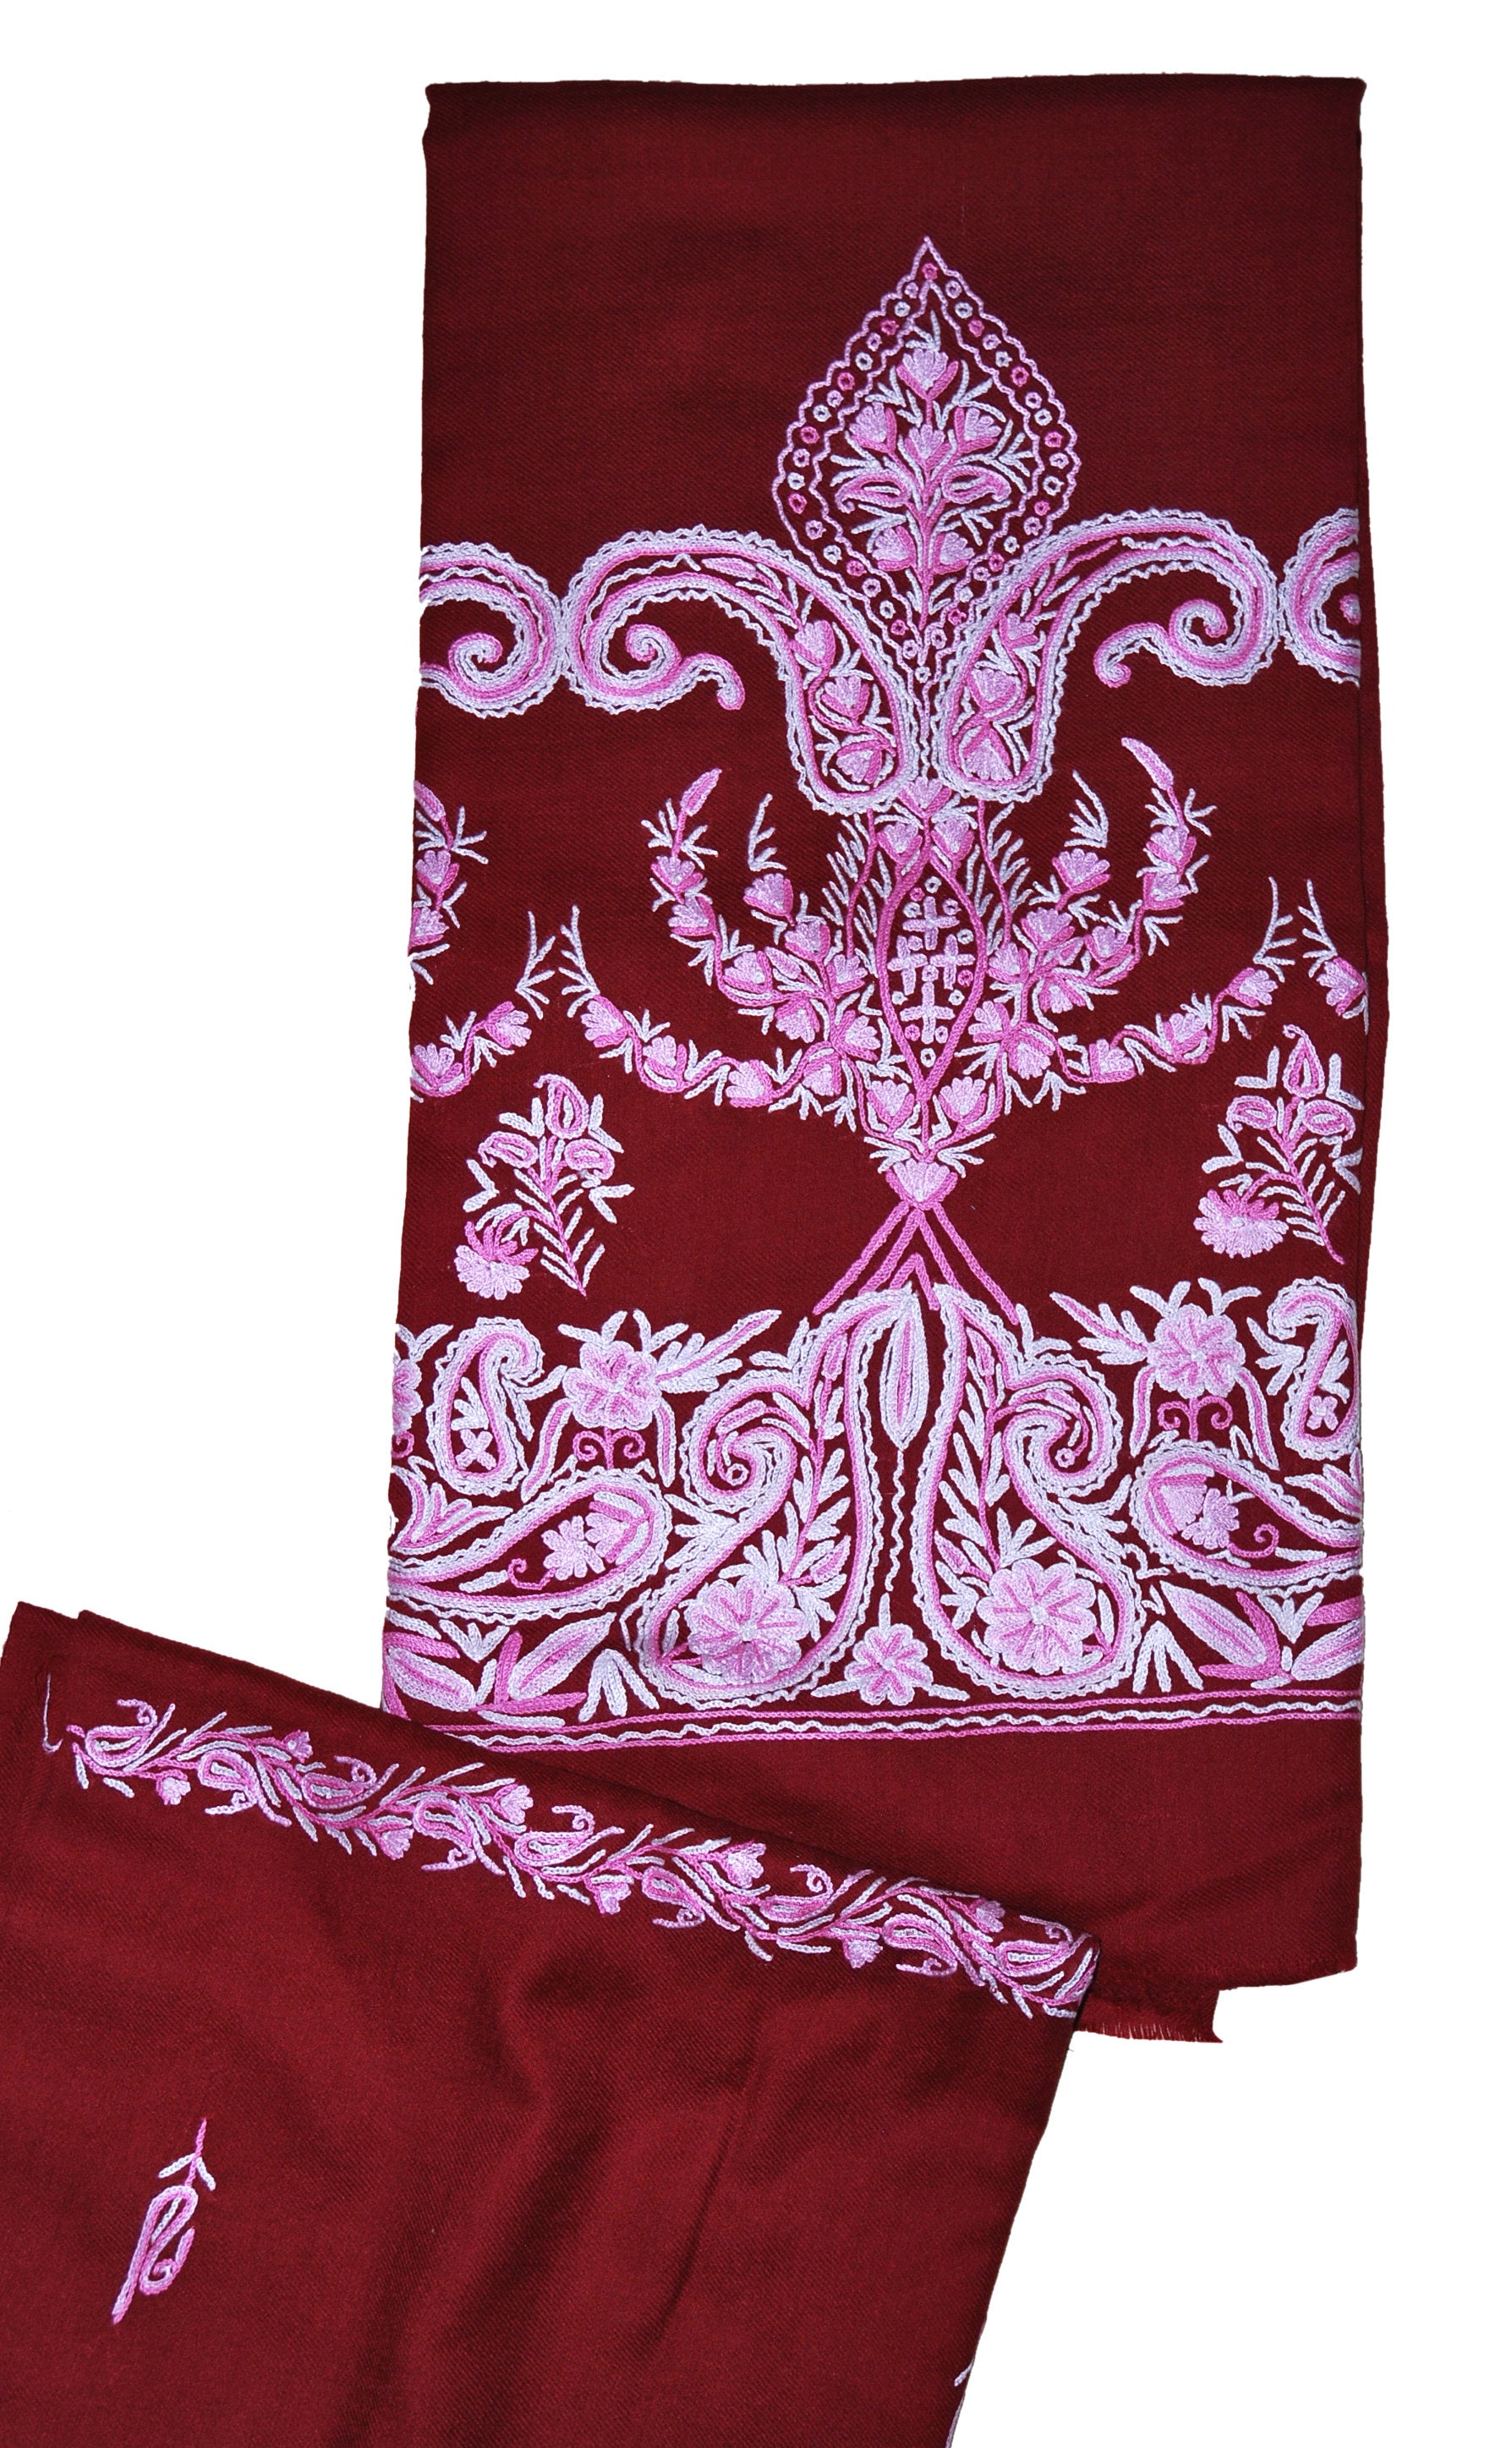 Woolen Salwar Kameez Suit Unstitched Fabric and Shawl Maroon, Pink and White Embroidery #FS-435